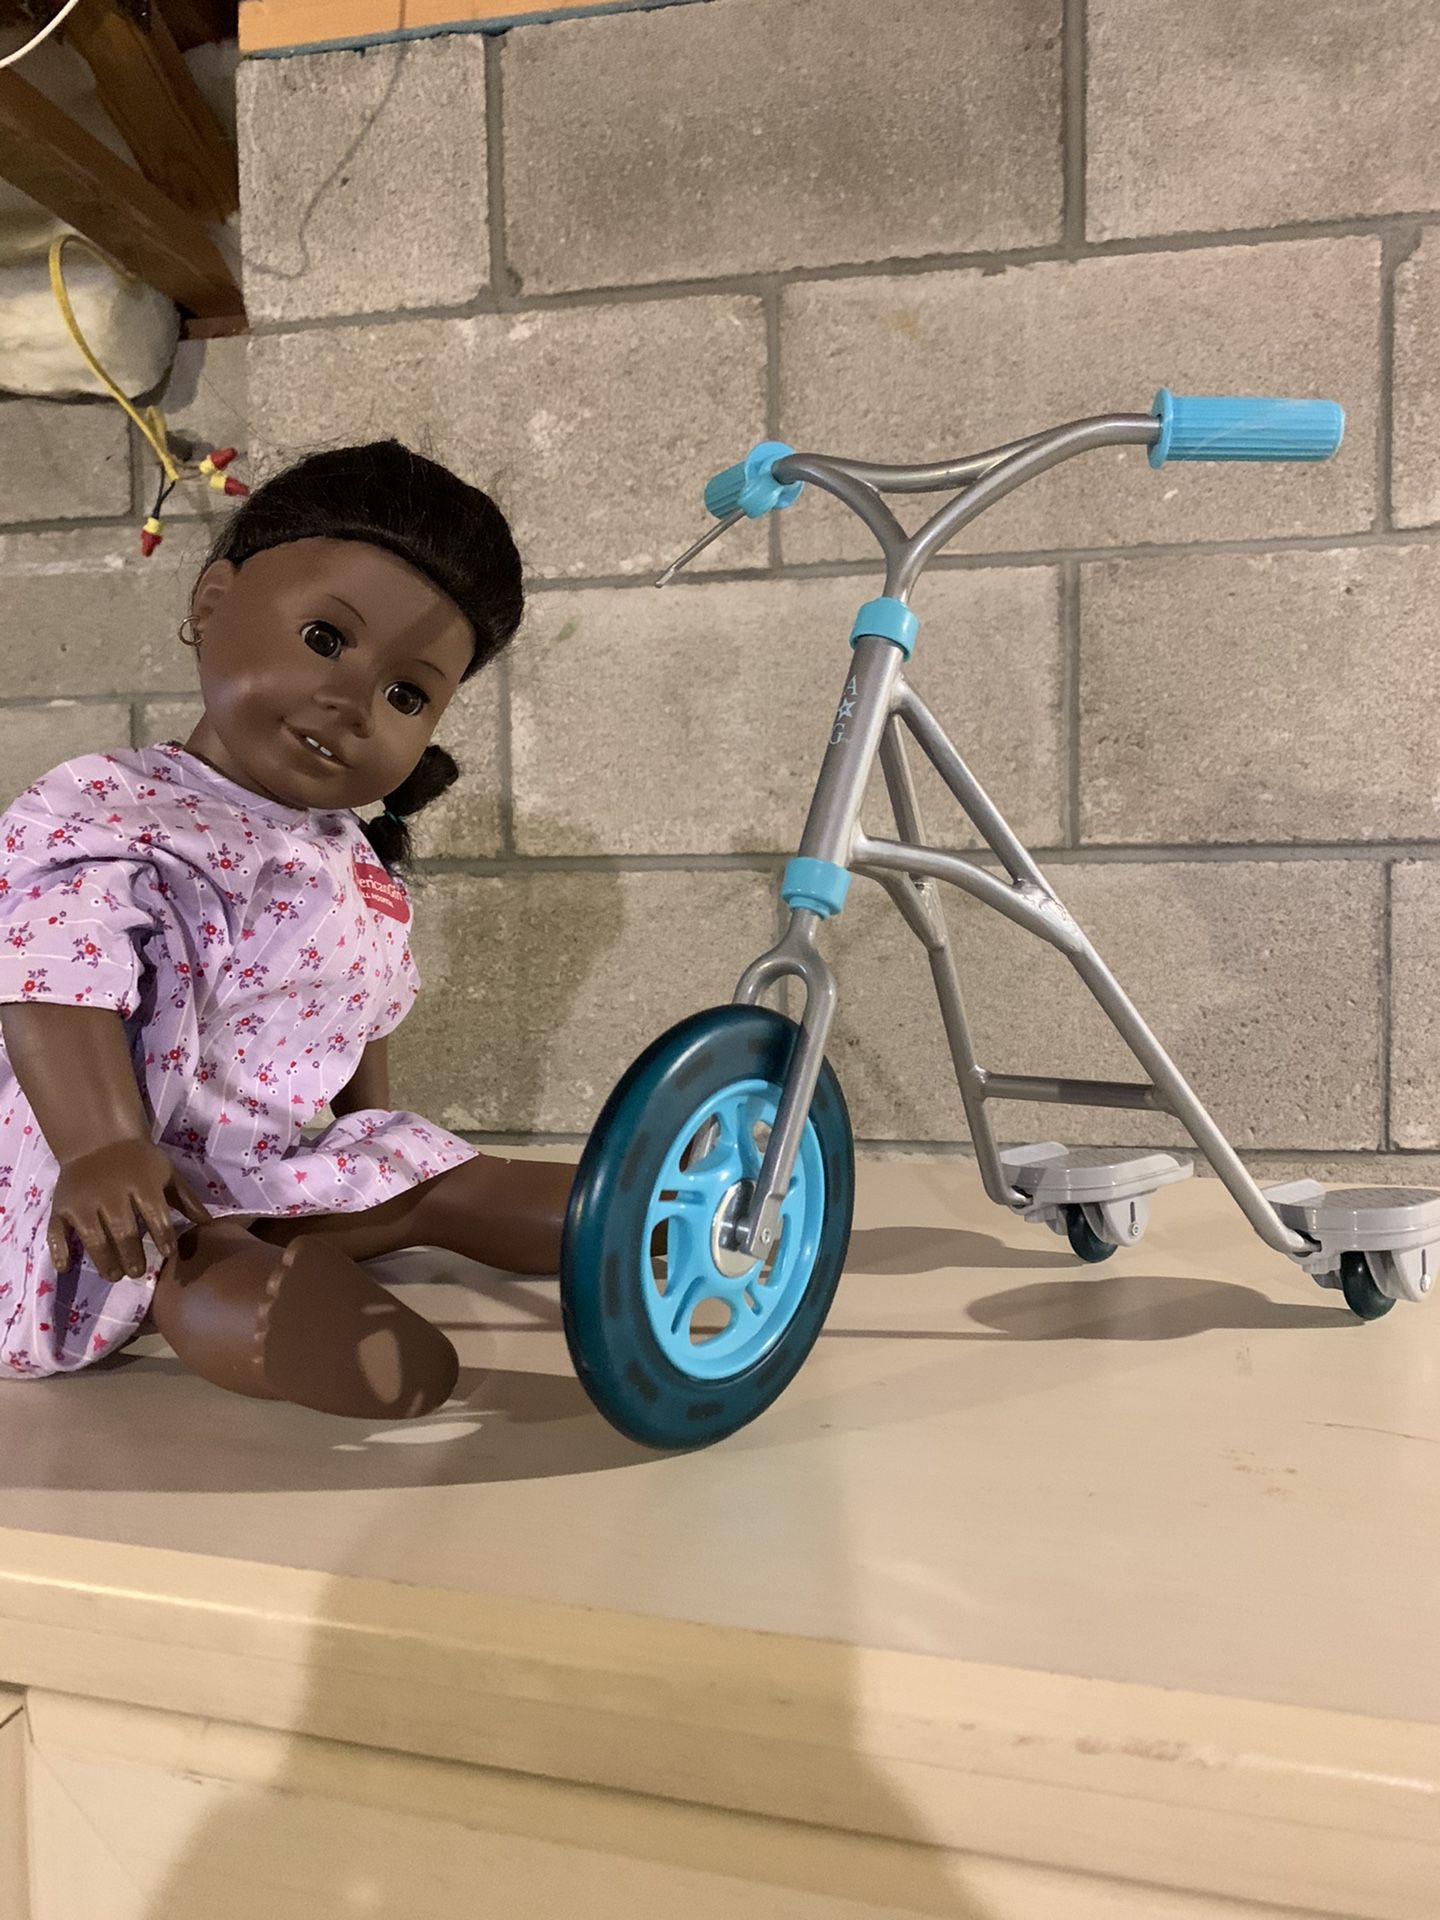 American girl doll addy and scooter